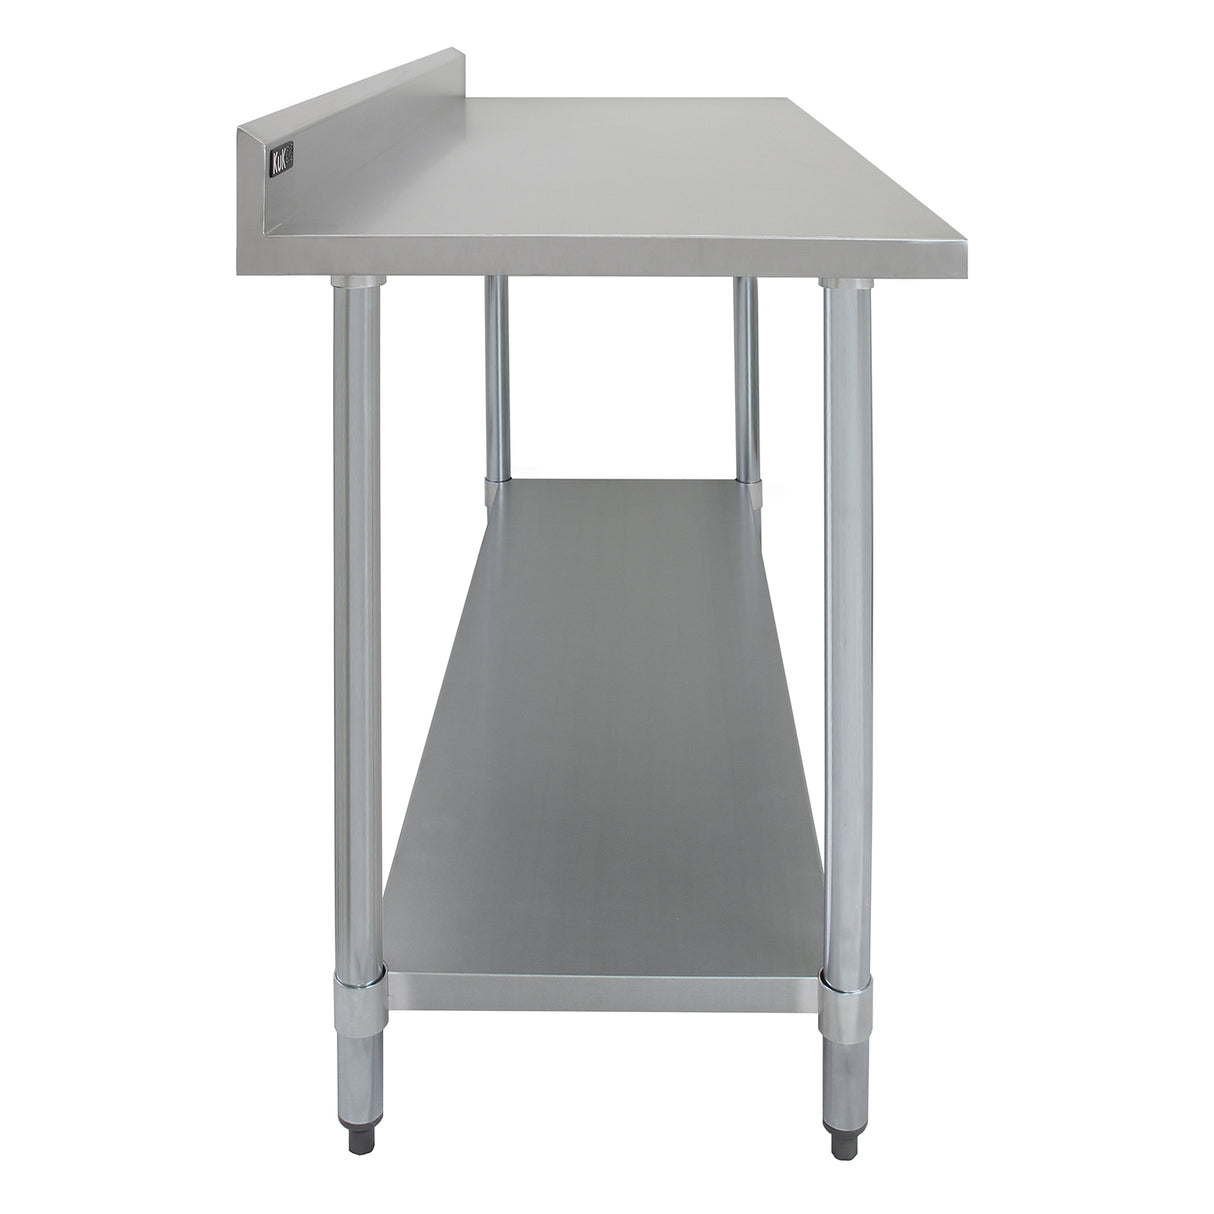 Kukoo 6ft Catering Bench with Double Over-shelf